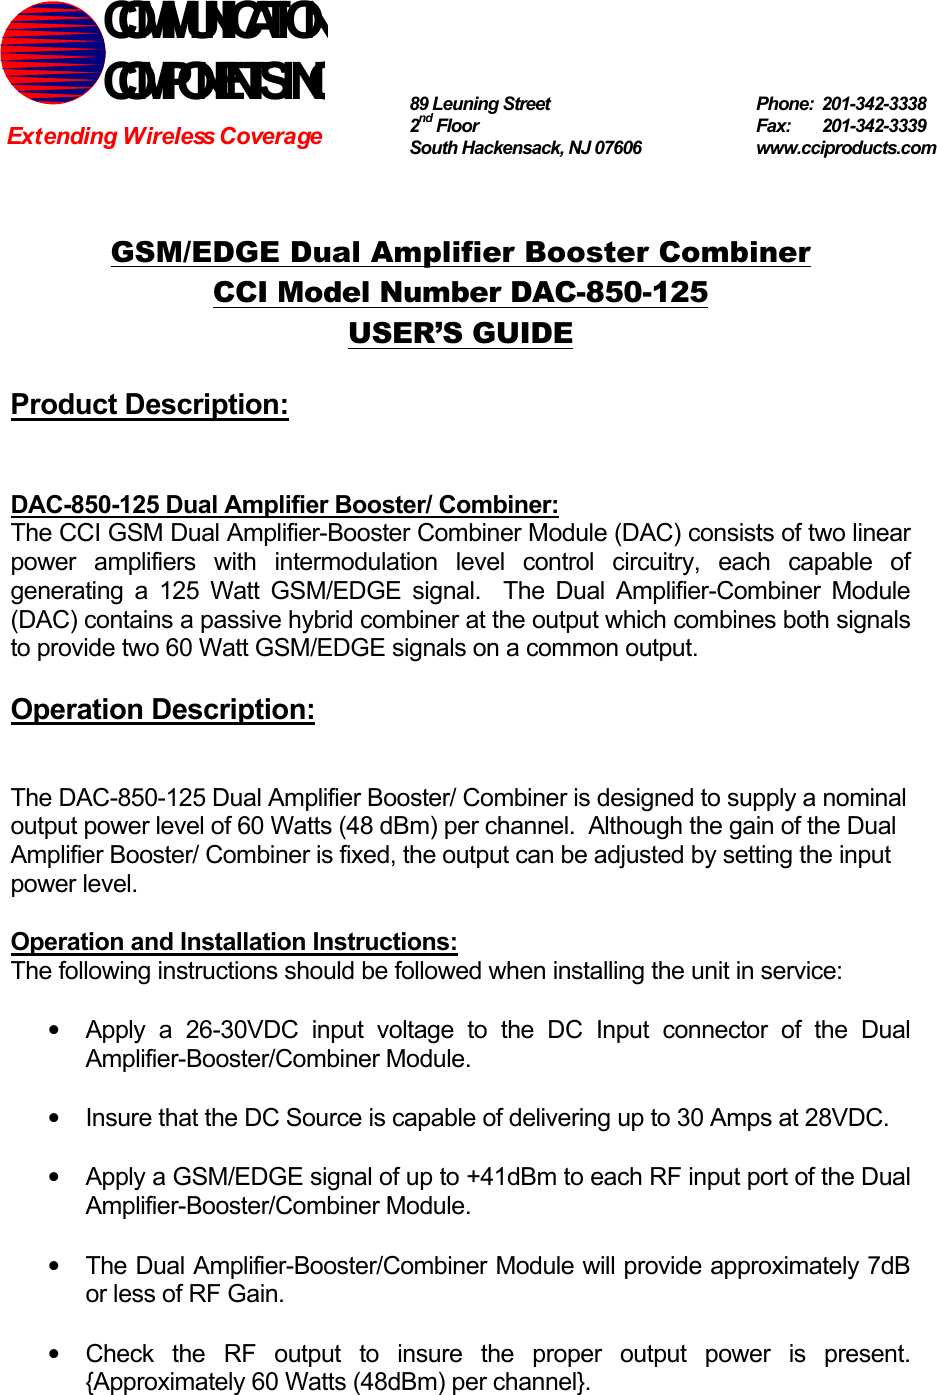   GSM/EDGE Dual Amplifier Booster Combiner CCI Model Number DAC-850-125 USER’S GUIDE  Product Description:   DAC-850-125 Dual Amplifier Booster/ Combiner: The CCI GSM Dual Amplifier-Booster Combiner Module (DAC) consists of two linear power amplifiers with intermodulation level control circuitry, each capable of generating a 125 Watt GSM/EDGE signal.  The Dual Amplifier-Combiner Module (DAC) contains a passive hybrid combiner at the output which combines both signals to provide two 60 Watt GSM/EDGE signals on a common output.  Operation Description:   The DAC-850-125 Dual Amplifier Booster/ Combiner is designed to supply a nominal output power level of 60 Watts (48 dBm) per channel.  Although the gain of the Dual Amplifier Booster/ Combiner is fixed, the output can be adjusted by setting the input power level.    Operation and Installation Instructions: The following instructions should be followed when installing the unit in service:  •  Apply a 26-30VDC input voltage to the DC Input connector of the Dual Amplifier-Booster/Combiner Module.  •  Insure that the DC Source is capable of delivering up to 30 Amps at 28VDC.  •  Apply a GSM/EDGE signal of up to +41dBm to each RF input port of the Dual Amplifier-Booster/Combiner Module.  •  The Dual Amplifier-Booster/Combiner Module will provide approximately 7dB or less of RF Gain.  •  Check the RF output to insure the proper output power is present. {Approximately 60 Watts (48dBm) per channel}. COMMUNICATION COMPONENTS INC Extending Wireless Coverage 89 Leuning Street   Phone: 201-342-3338 2nd Floor  Fax:   201-342-3339 South Hackensack, NJ 07606   www.cciproducts.com 